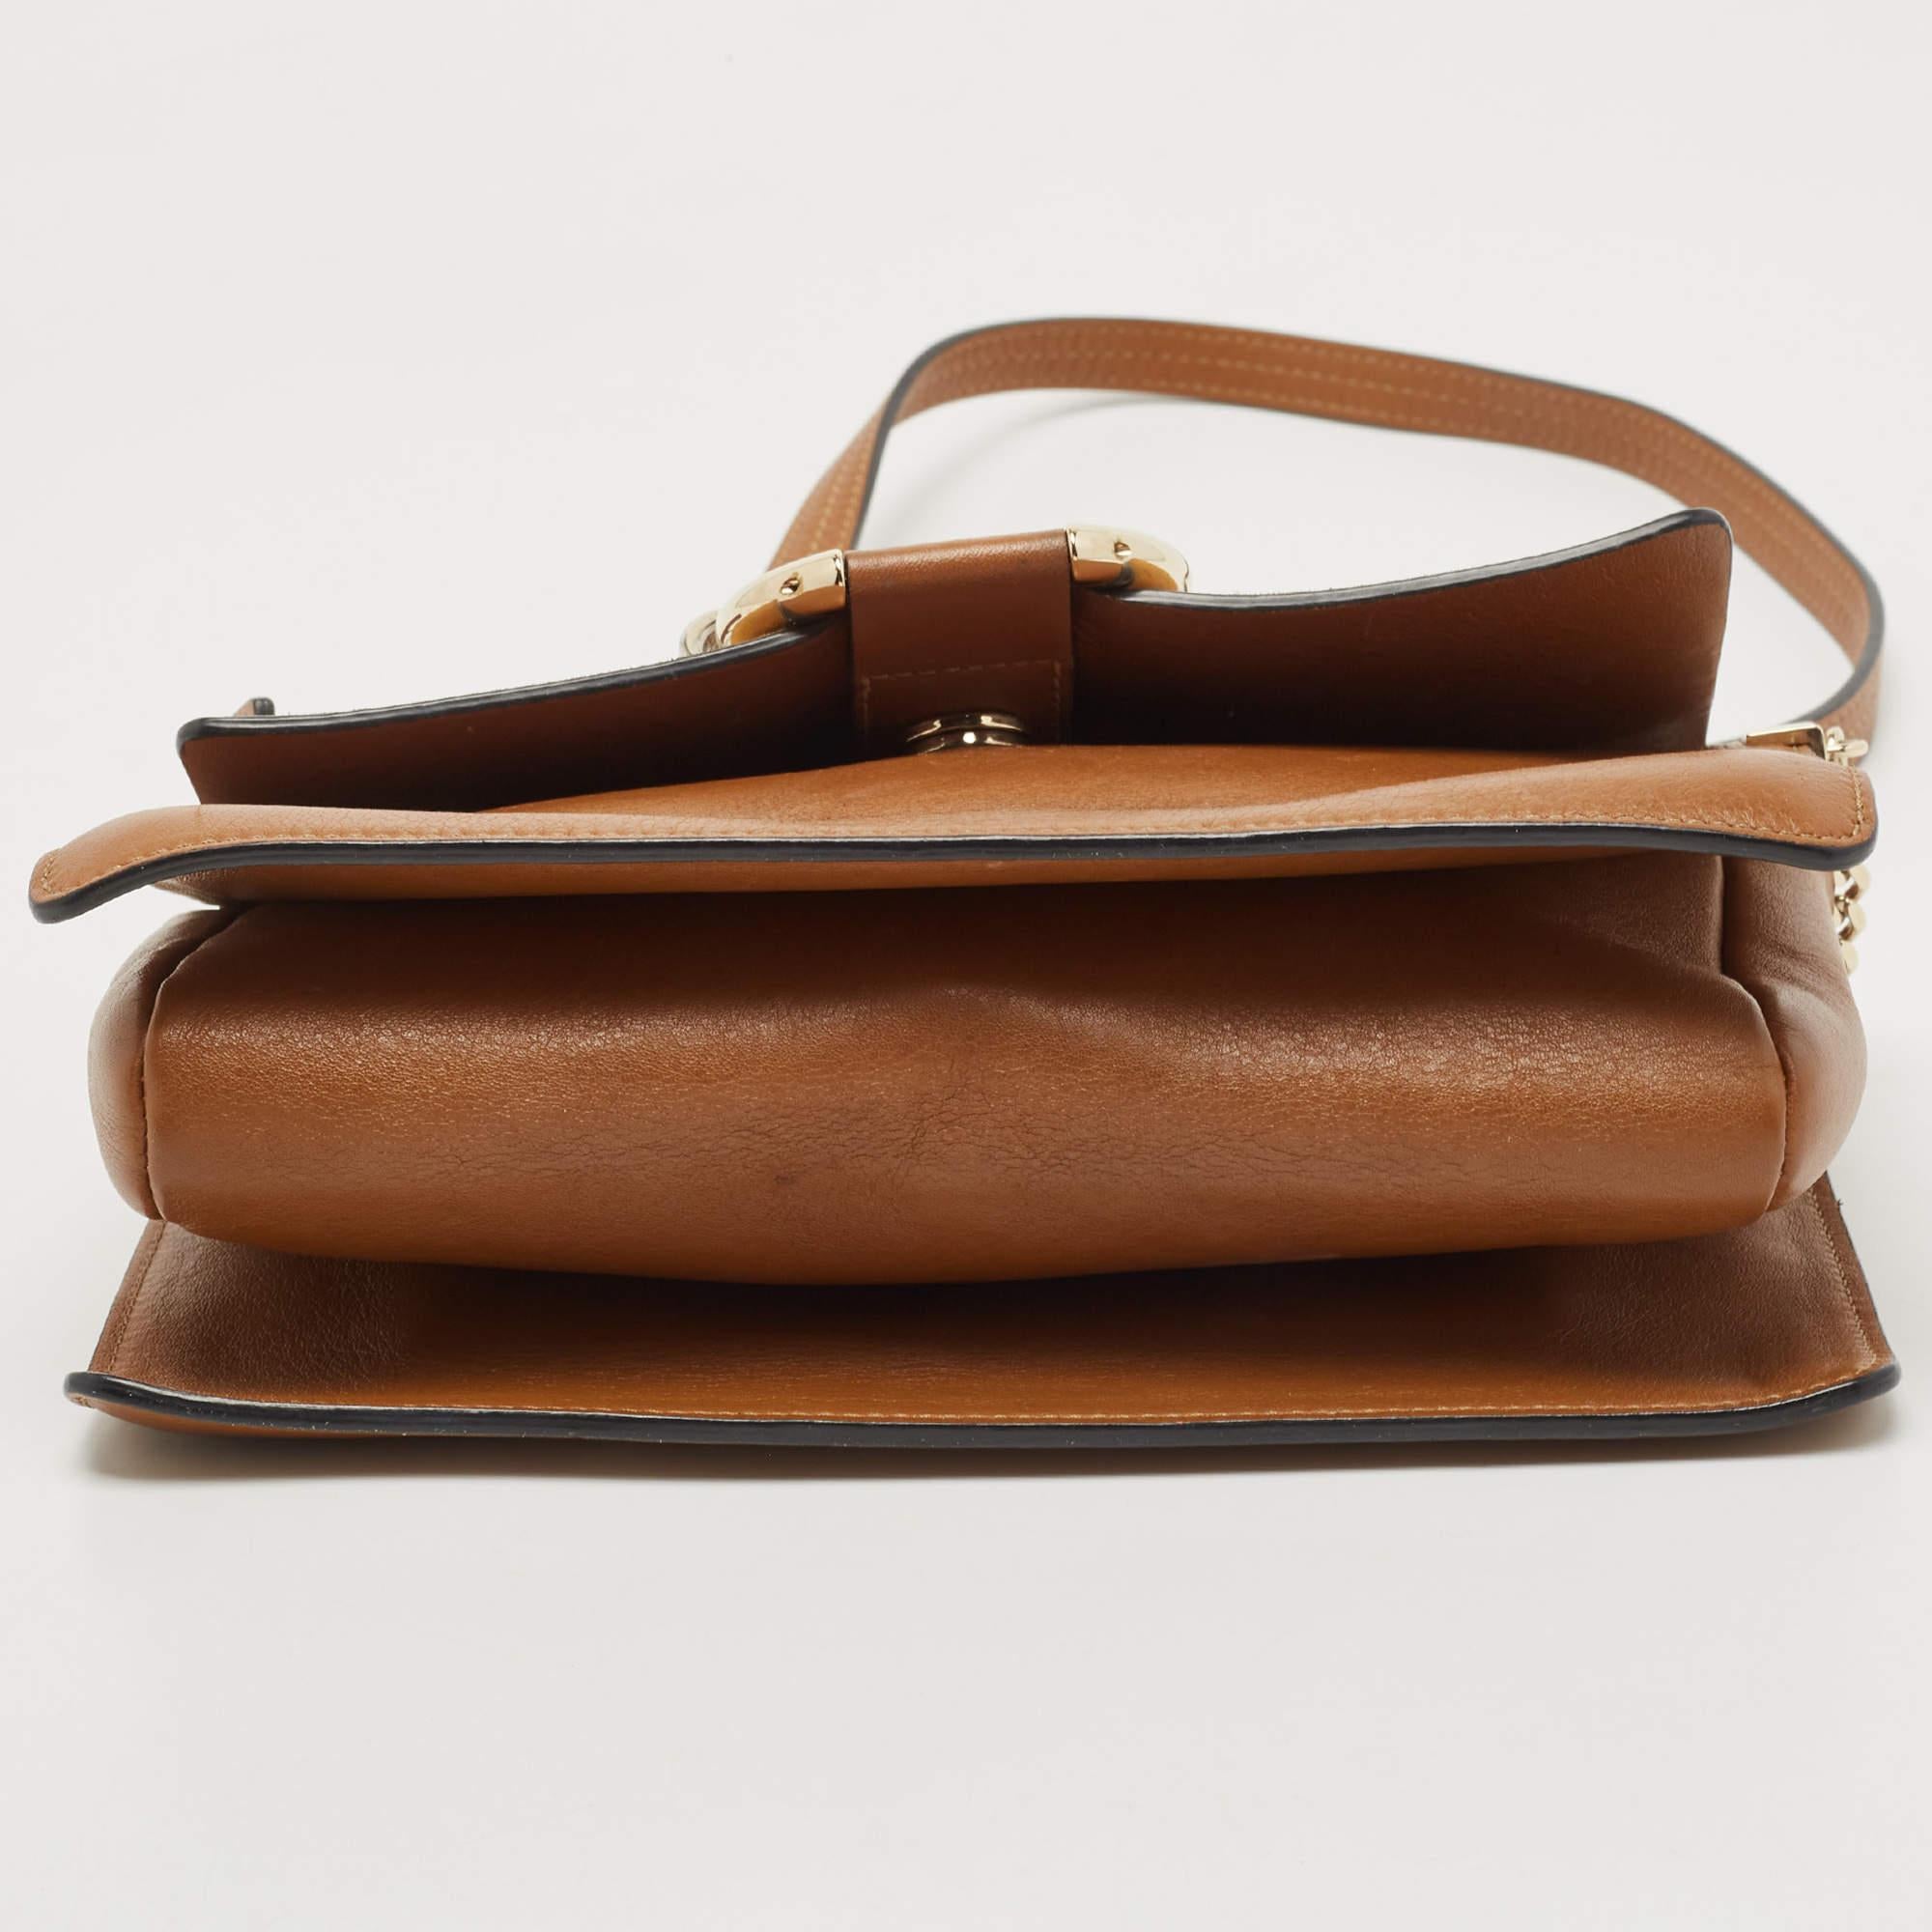 Chloe Brown/Tan Leather and Suede Small Faye Shoulder Bag 1